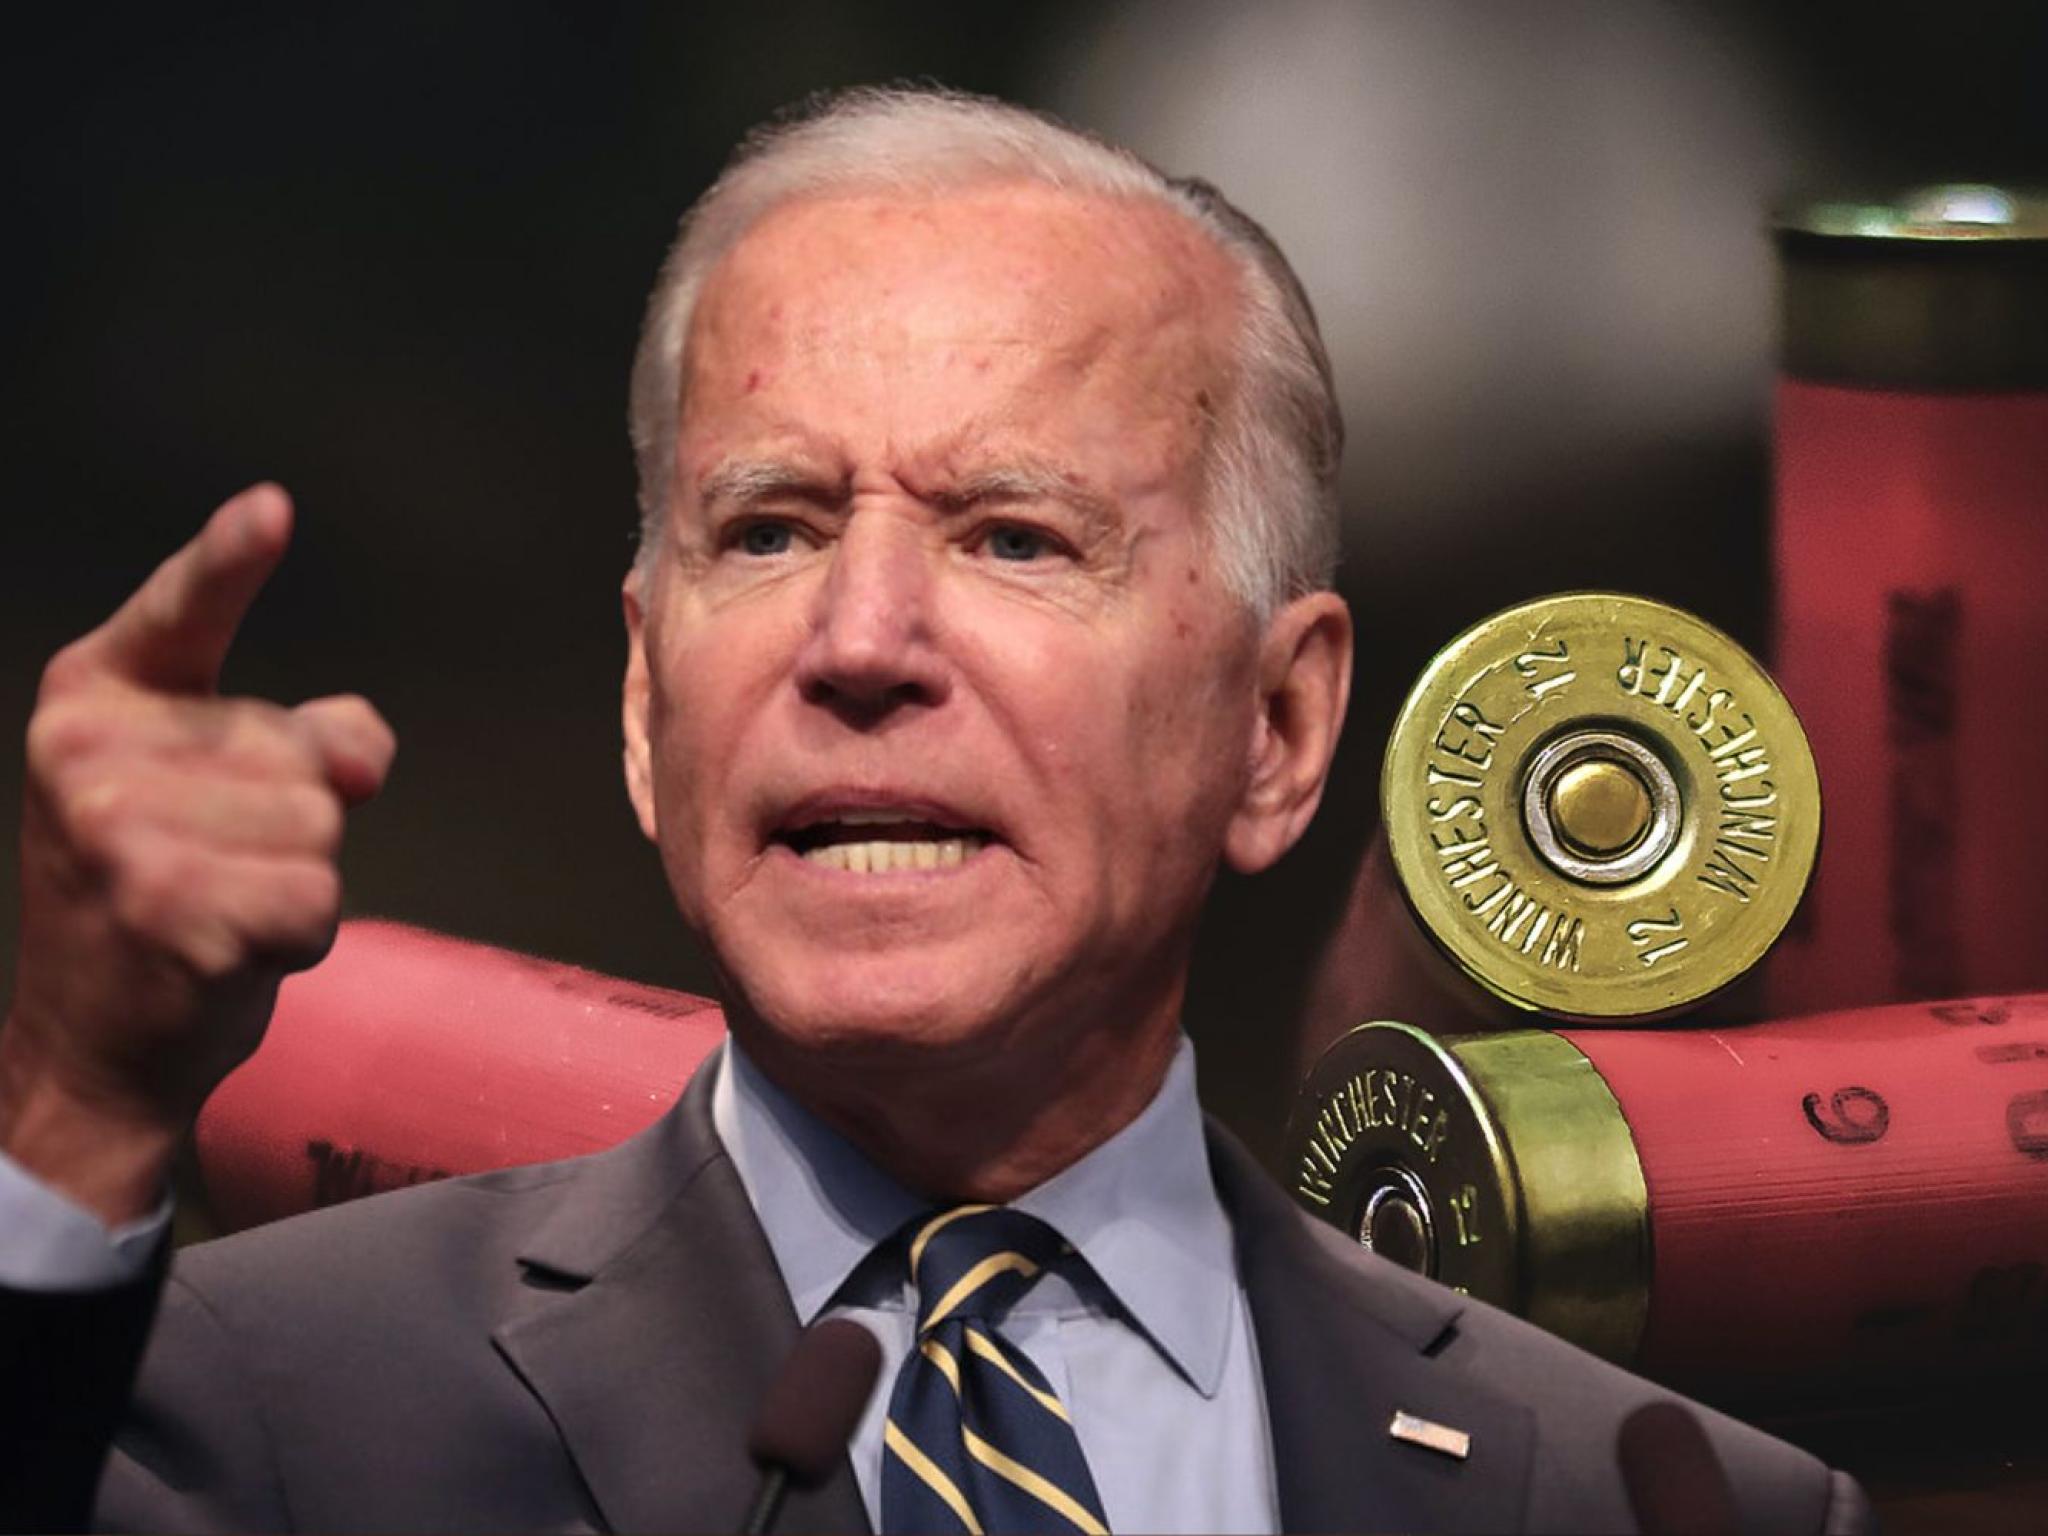  biden-signs-bipartisan-gun-safety-bill-into-law-god-willing-its-going-to-save-a-lot-of-lives 